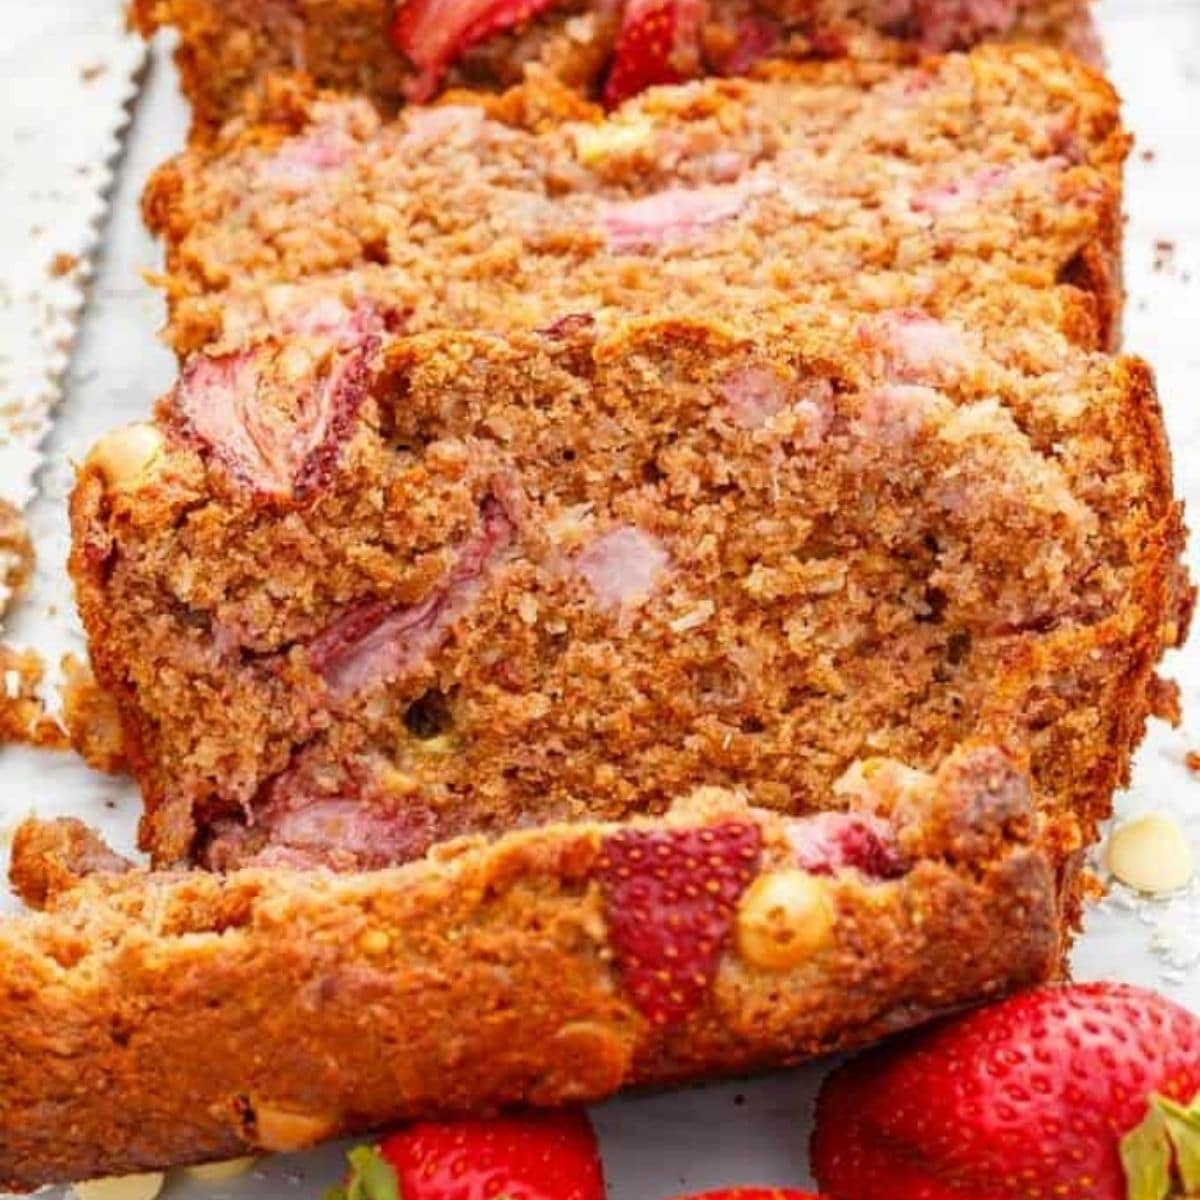 White chocolate strawberry banana bread slices with ripe strawberries on white background